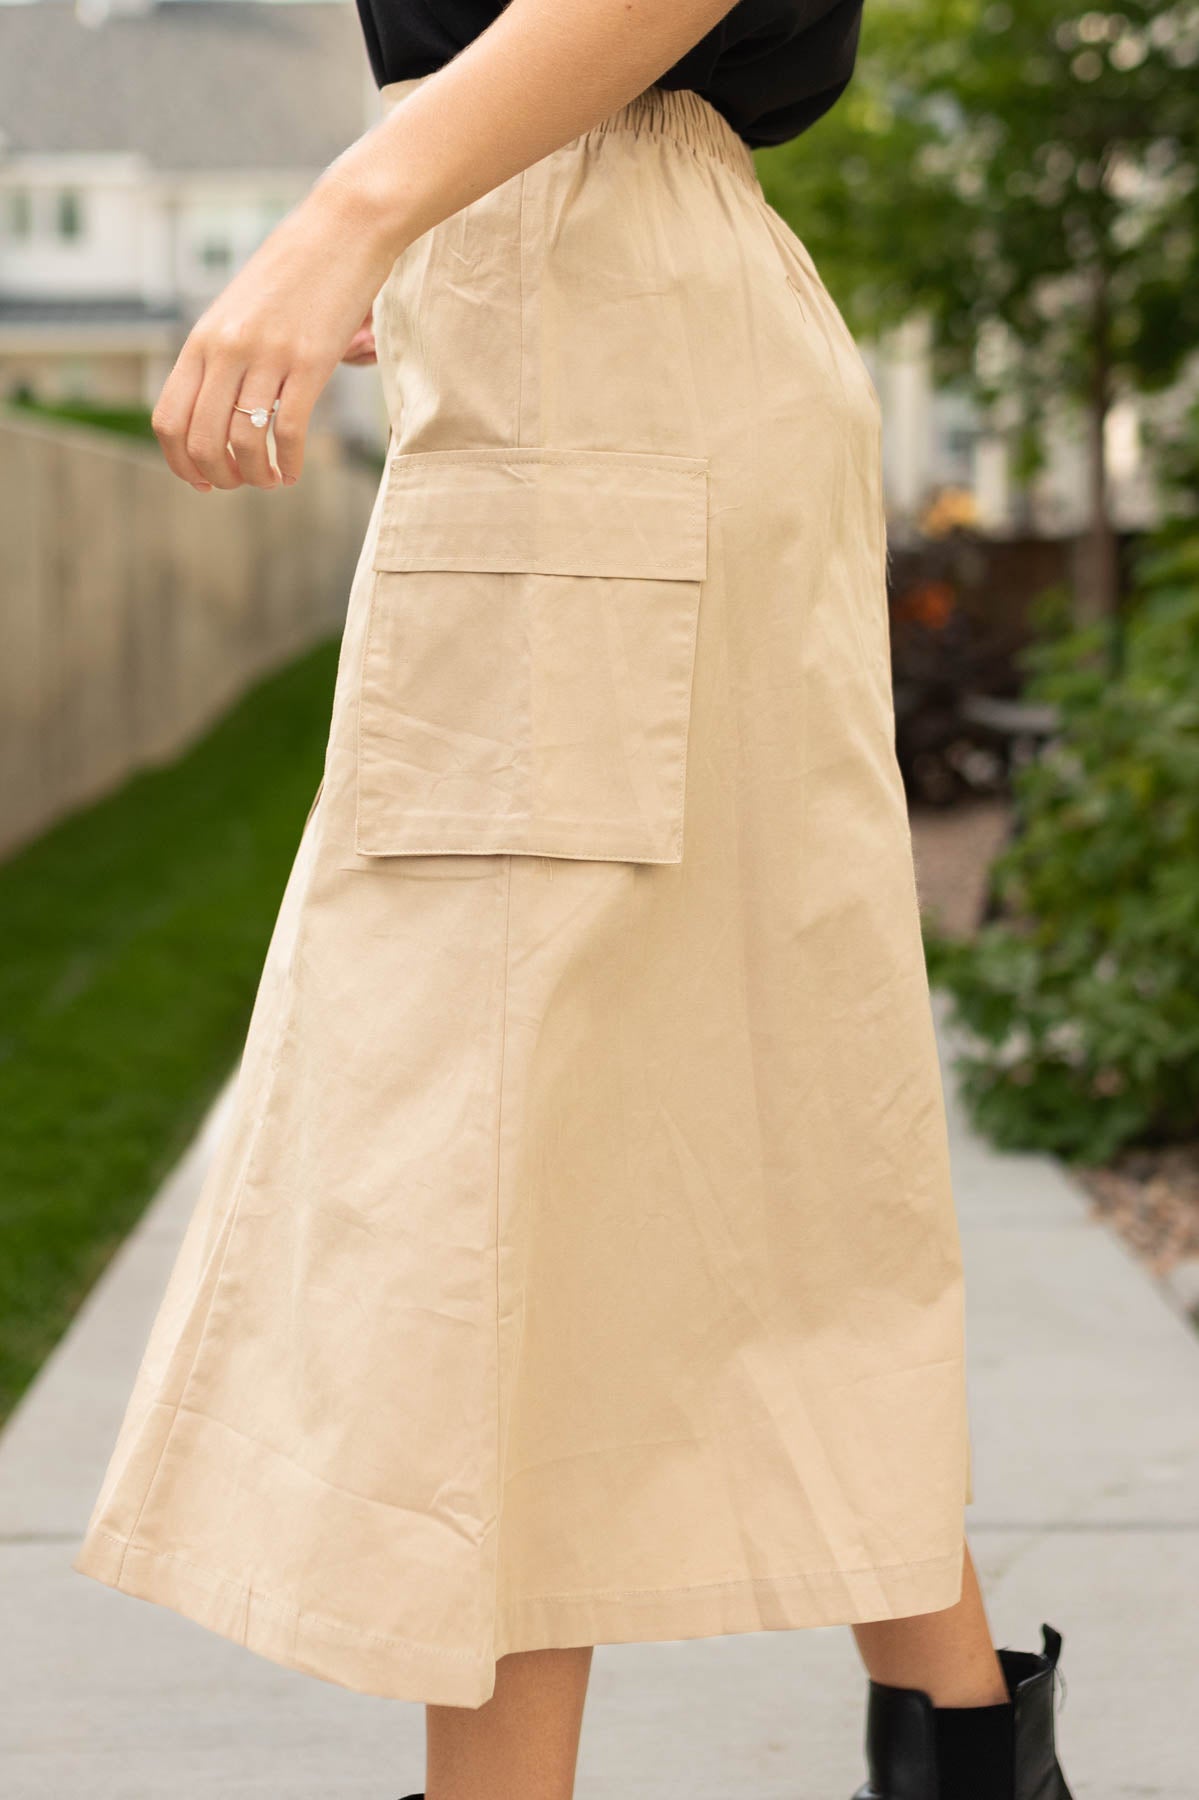 Side view of a beige skirt with pockets on the side